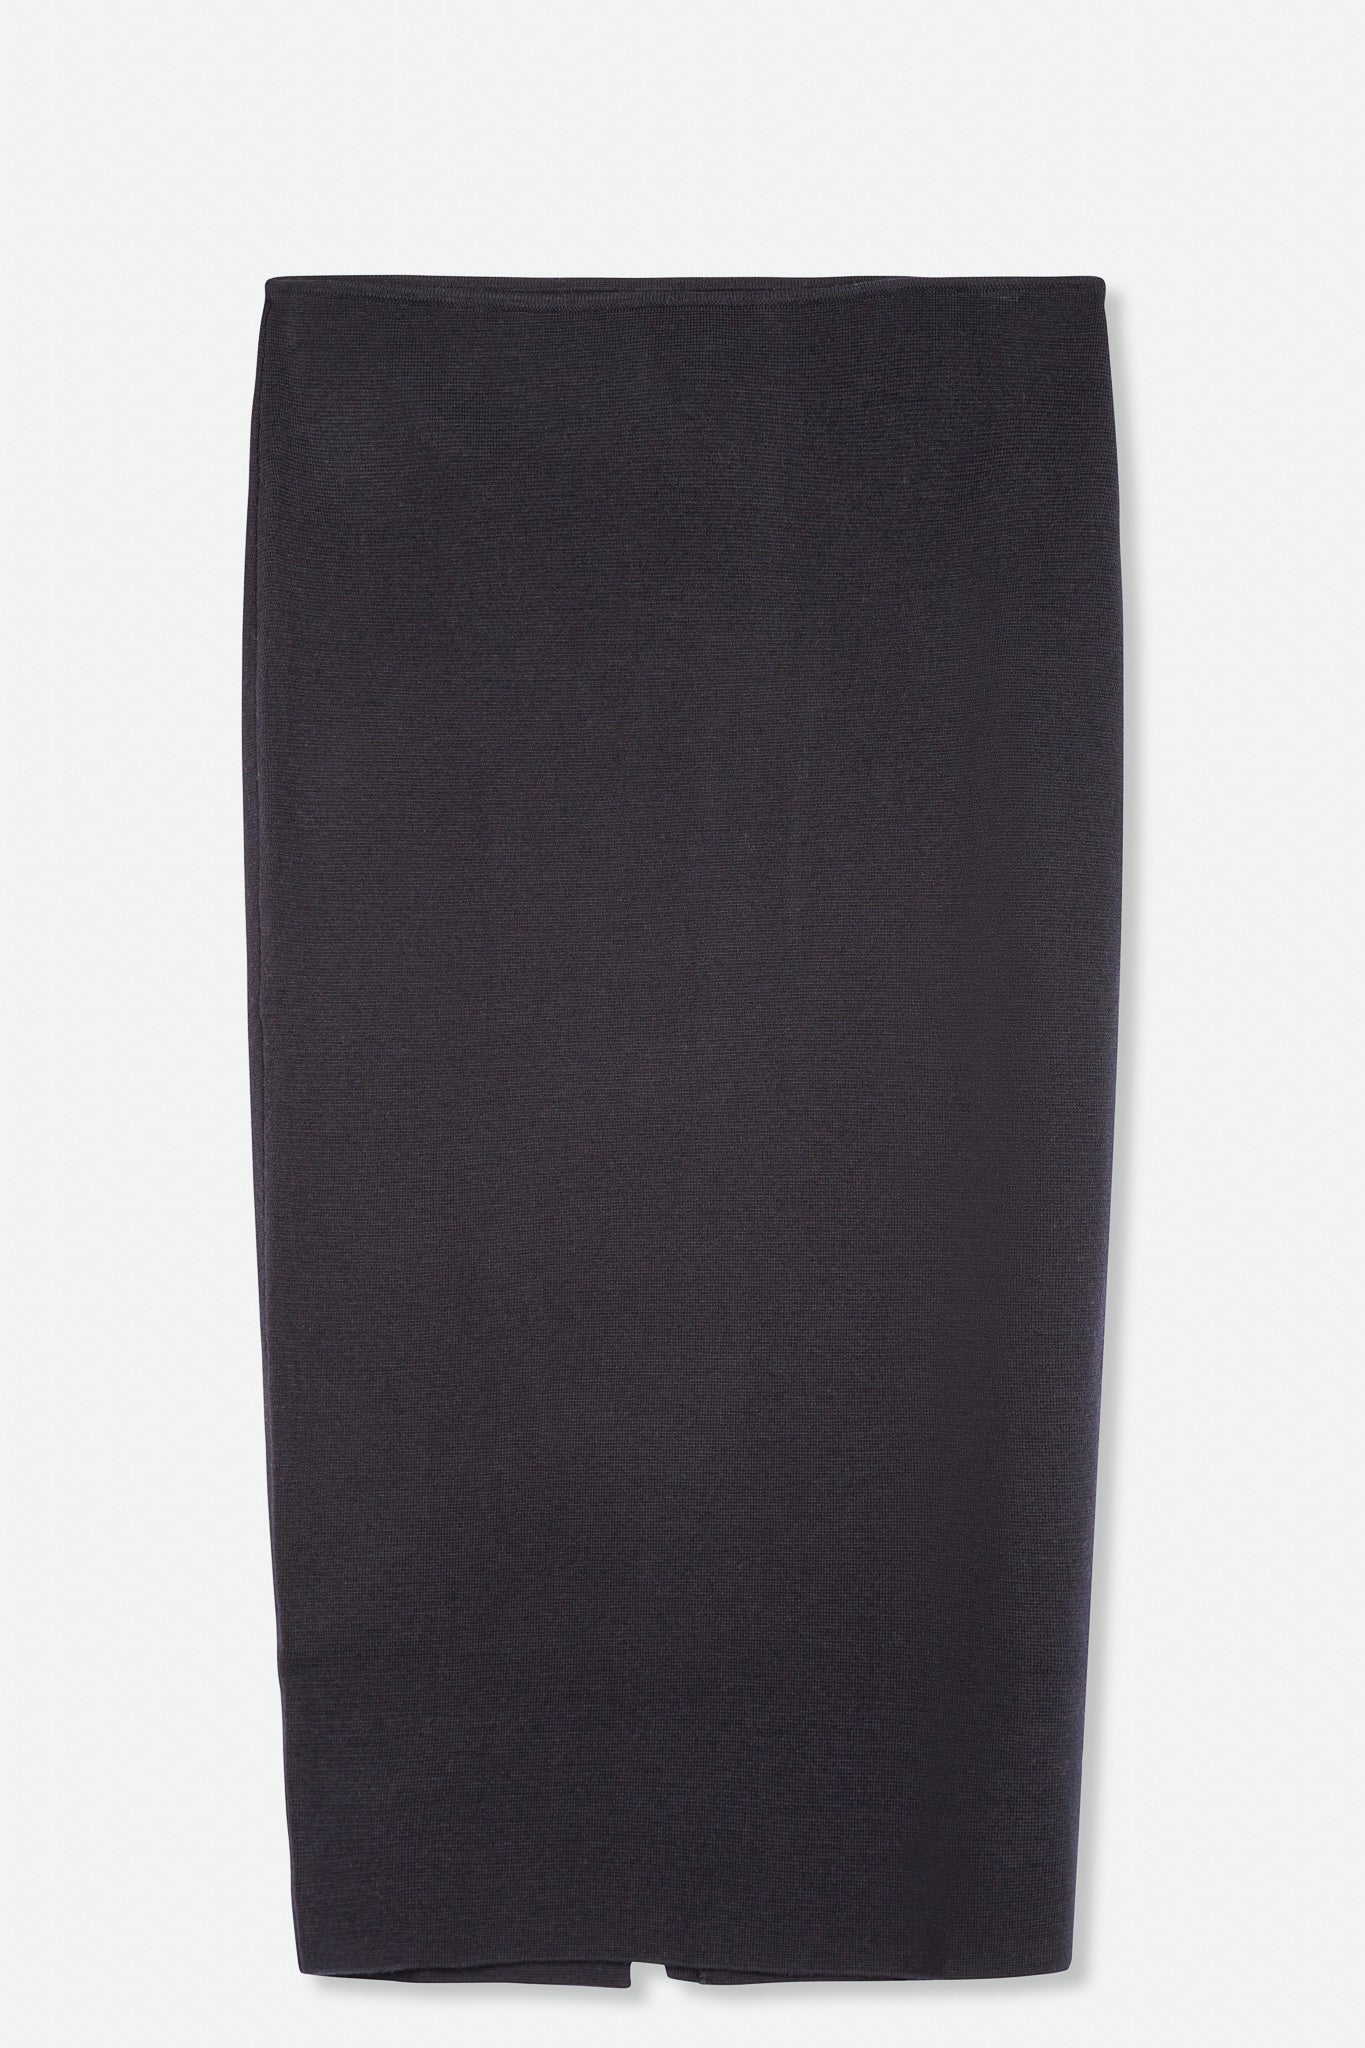 MADISON FITTED PENCIL SKIRT IN SUPER FINE MERINO KNIT - Jarbo